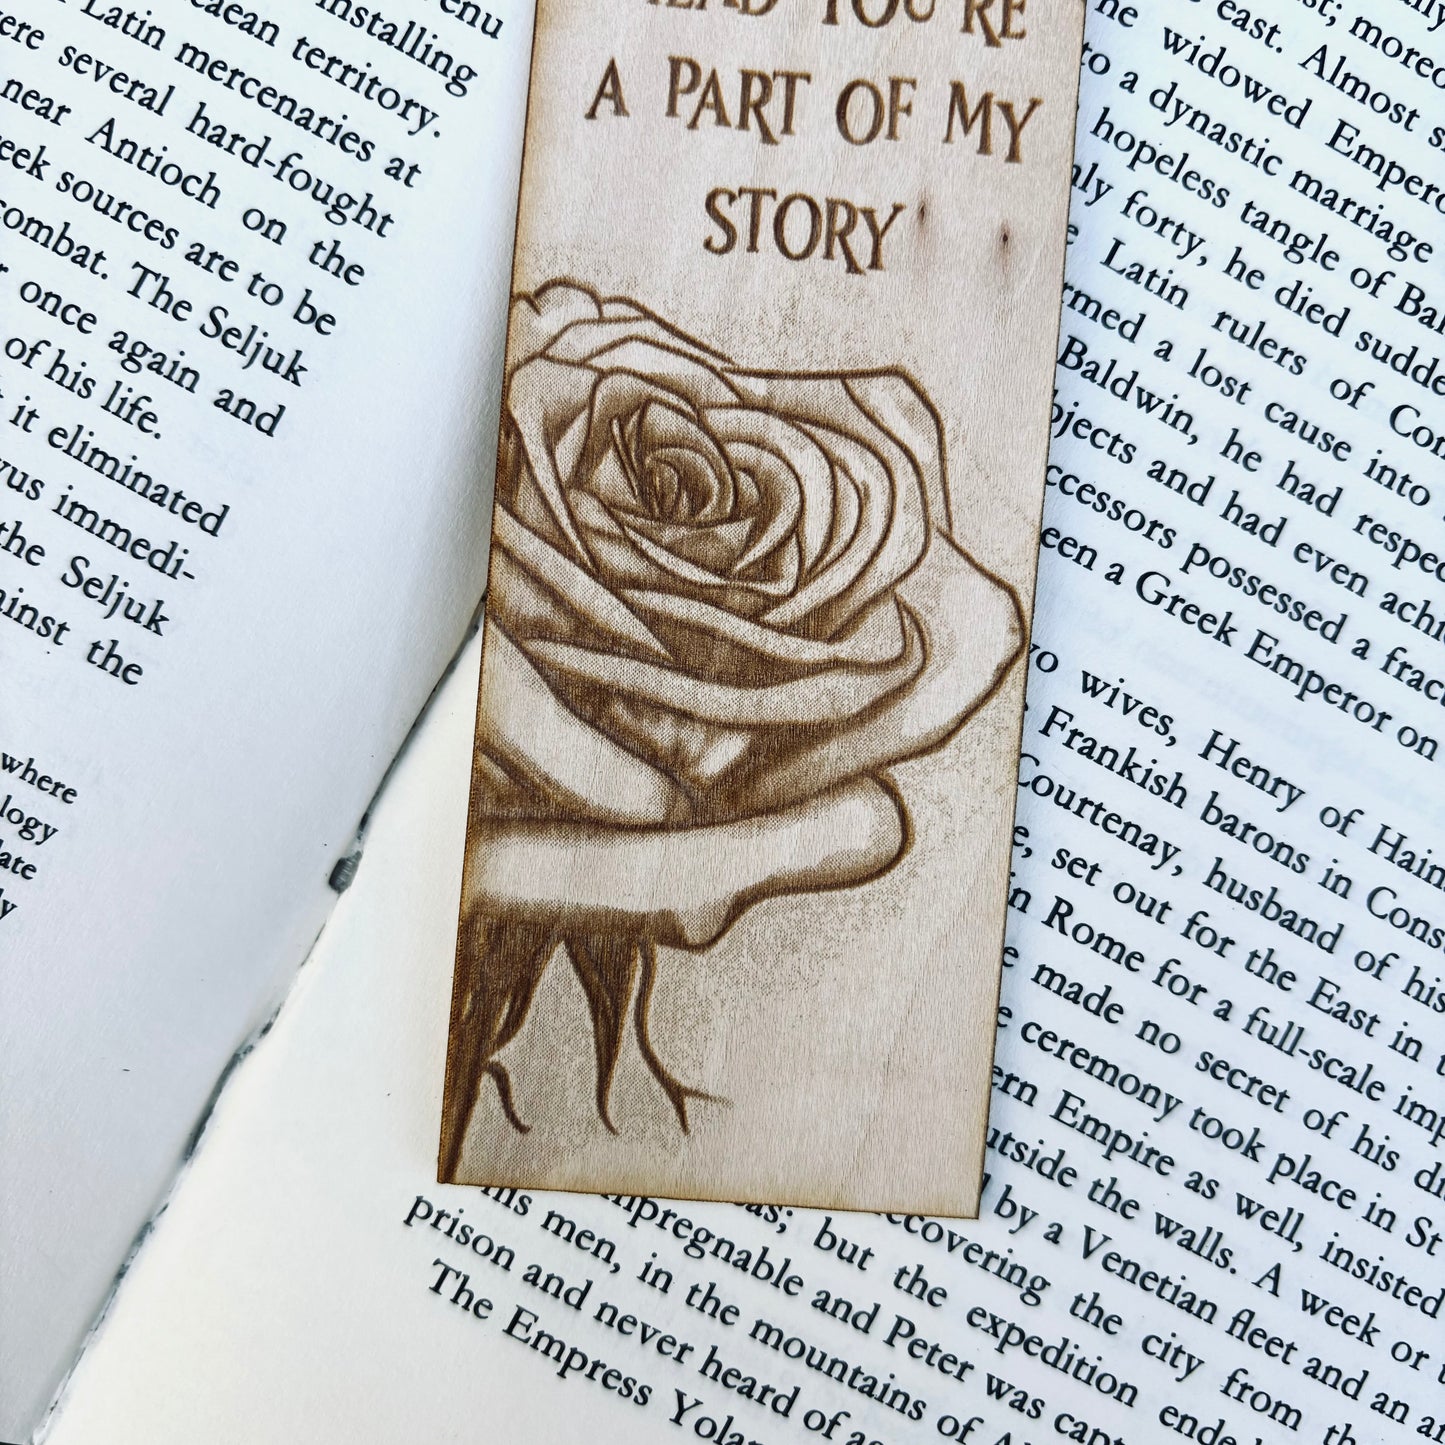 Personalized Rose Bookmark